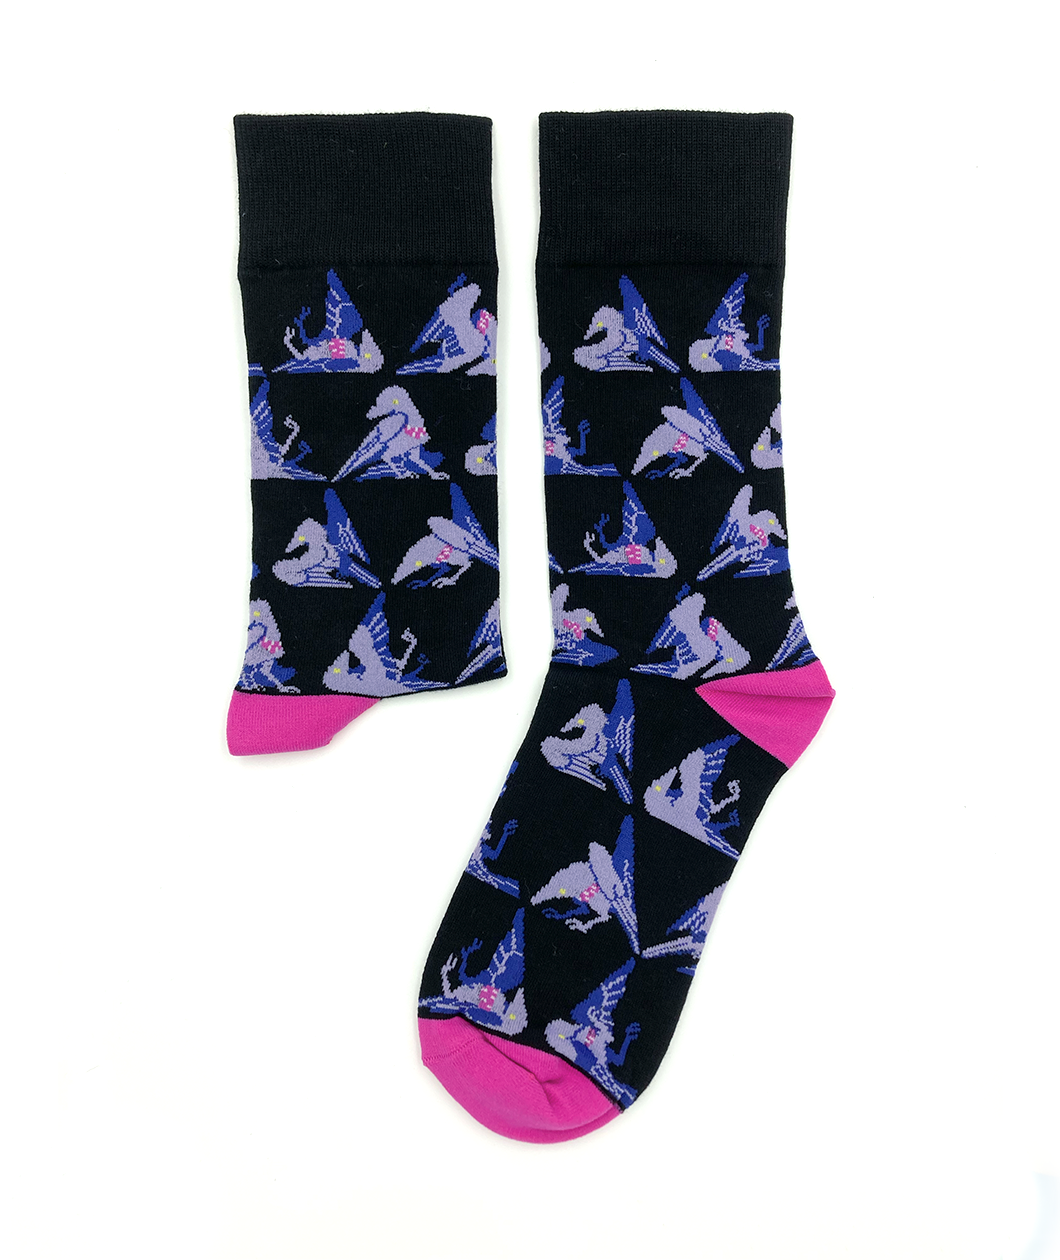 A pair of black socks with purple Maw birds on them, with a bright pink heel and toe. From Johnny Wander. 